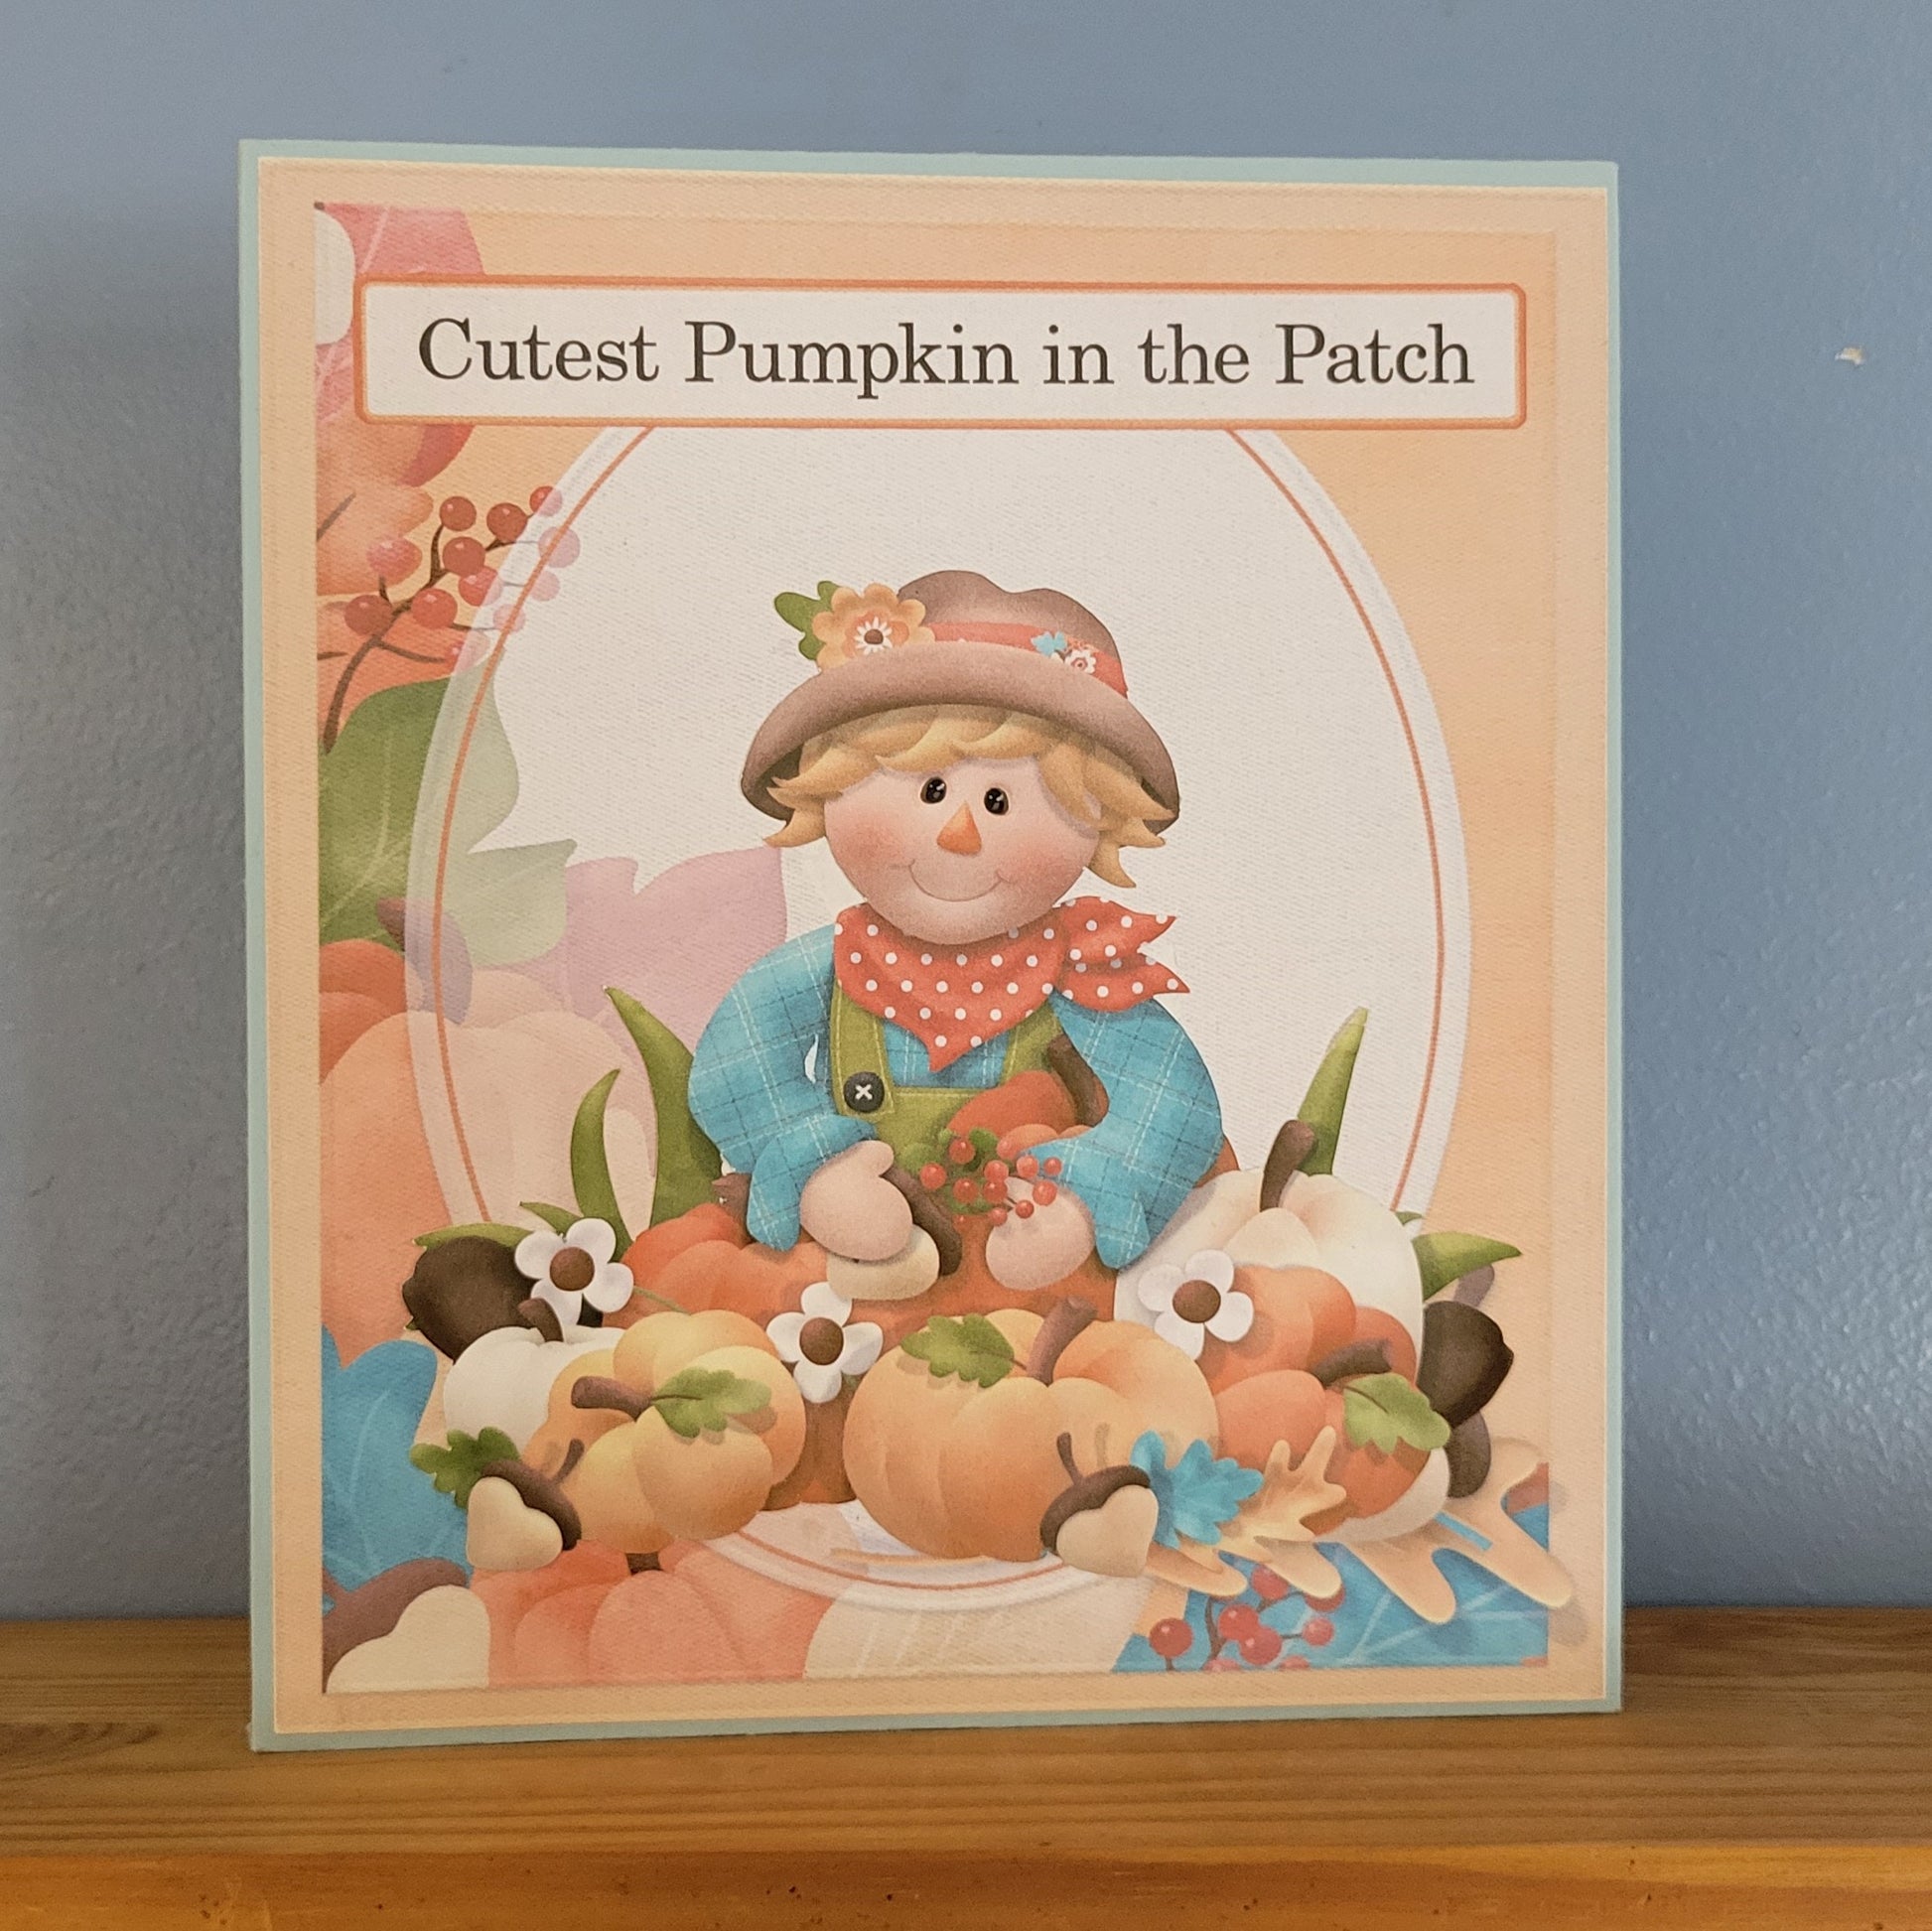 Cutest Pumpkin in the Patch Photo Album front cover.